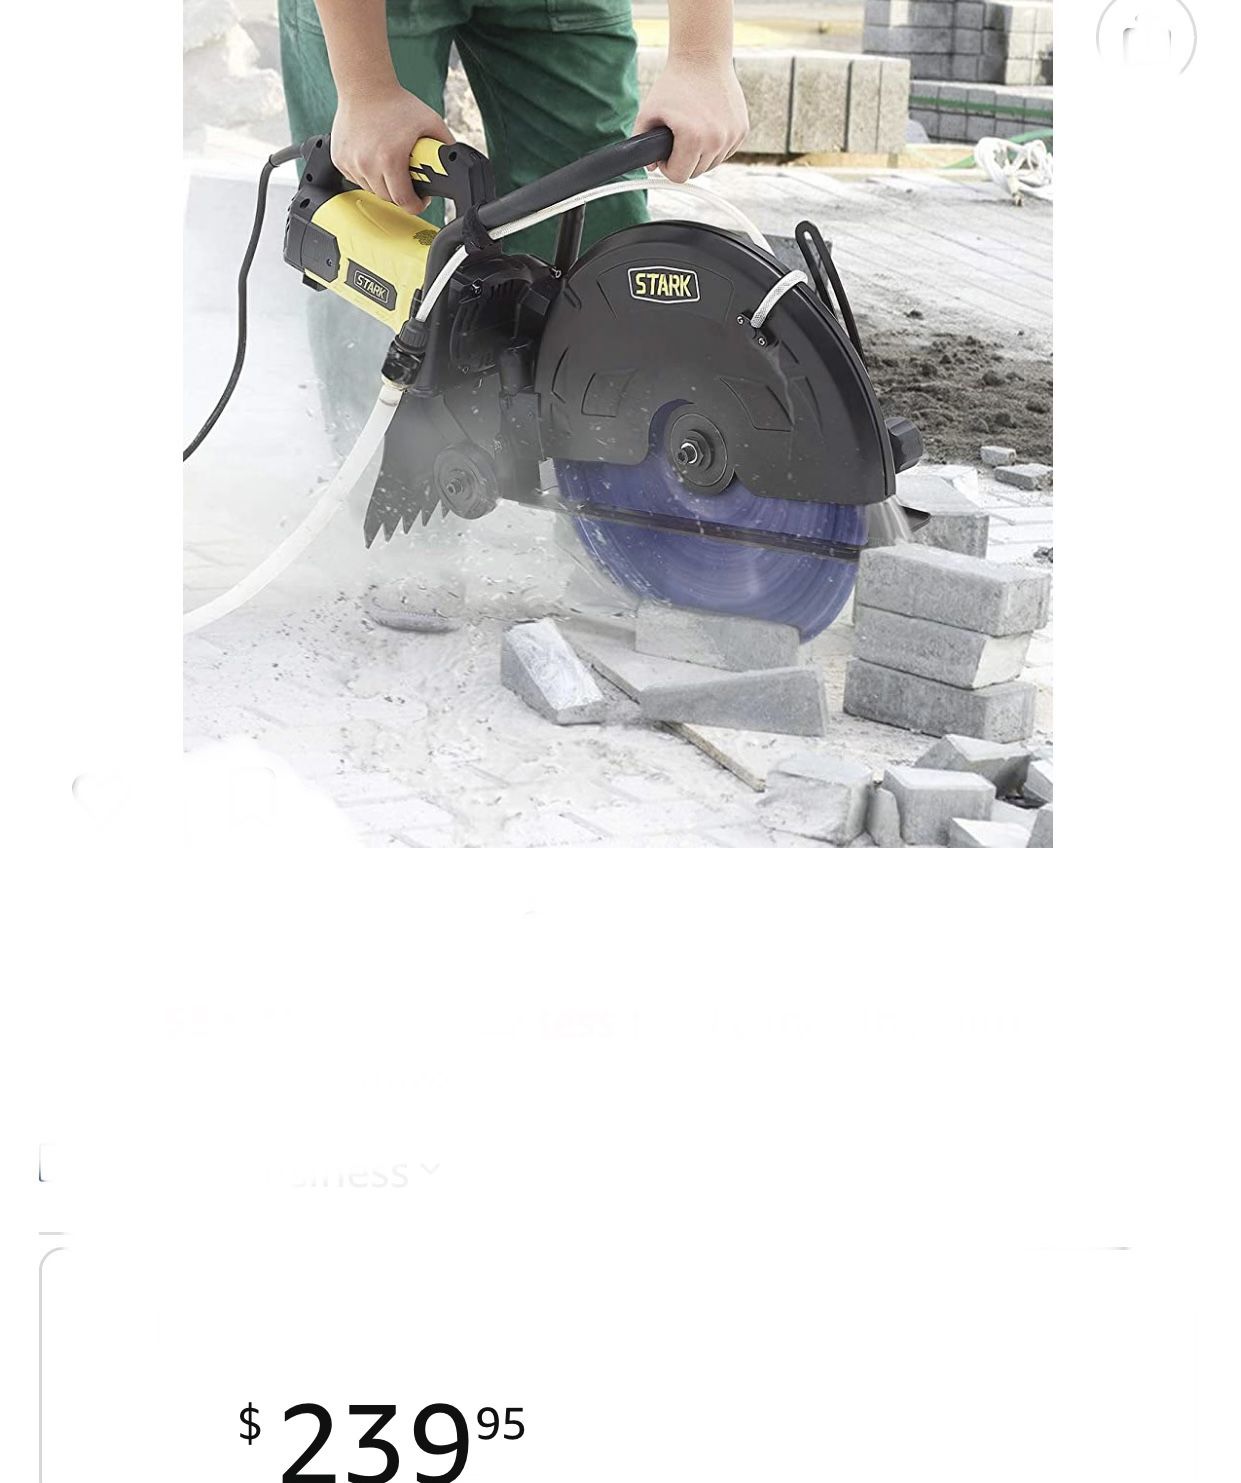 Stark 3200W 16 Inch Electric Concrete Cutter for Circular Saw, Wet/Dry Saw, Guide  Roller with Water Line Attachment (Blade Not Included), Cut-Off Saw, for  Sale in Anaheim, CA OfferUp